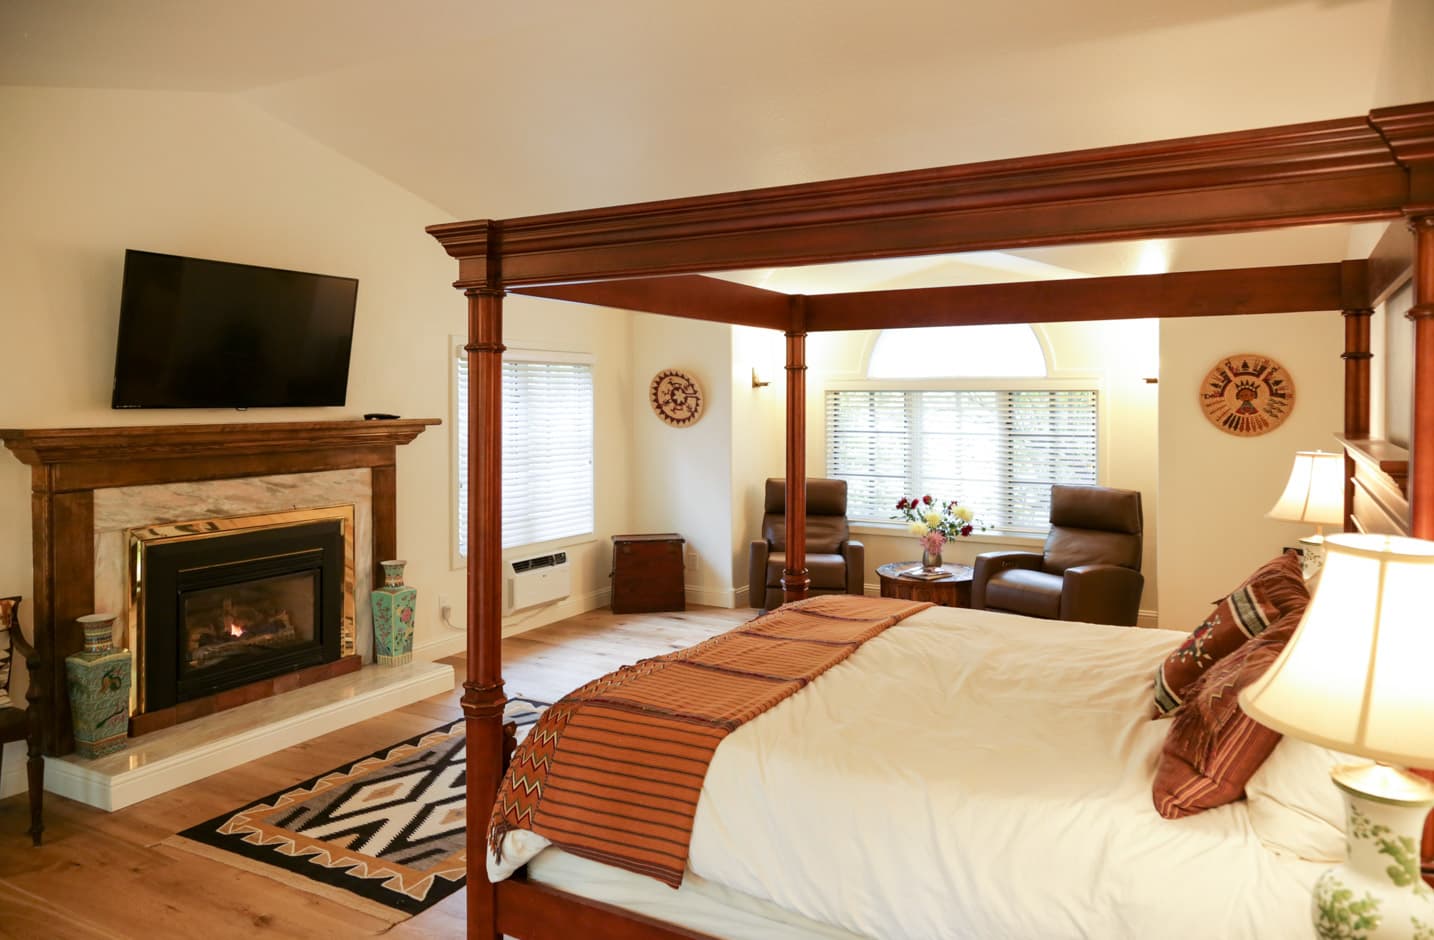 4 poster king size bed in a spacious room with hardwood floors, flat screen tv, and fireplace